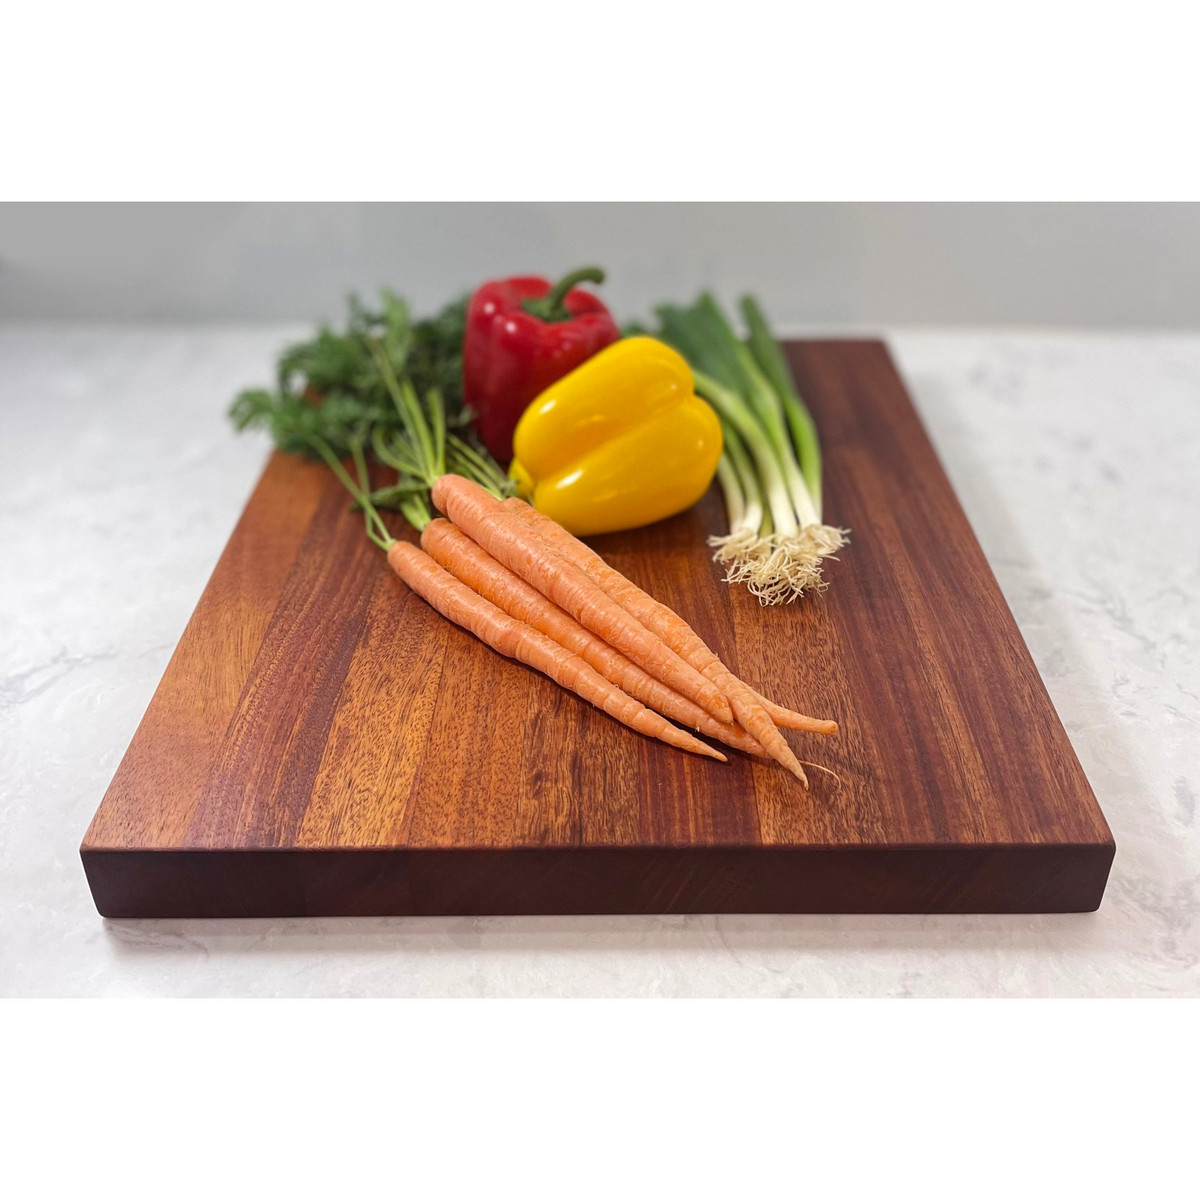 African Mahogany Cutting Board Wooden Stove Top Cover Box Style